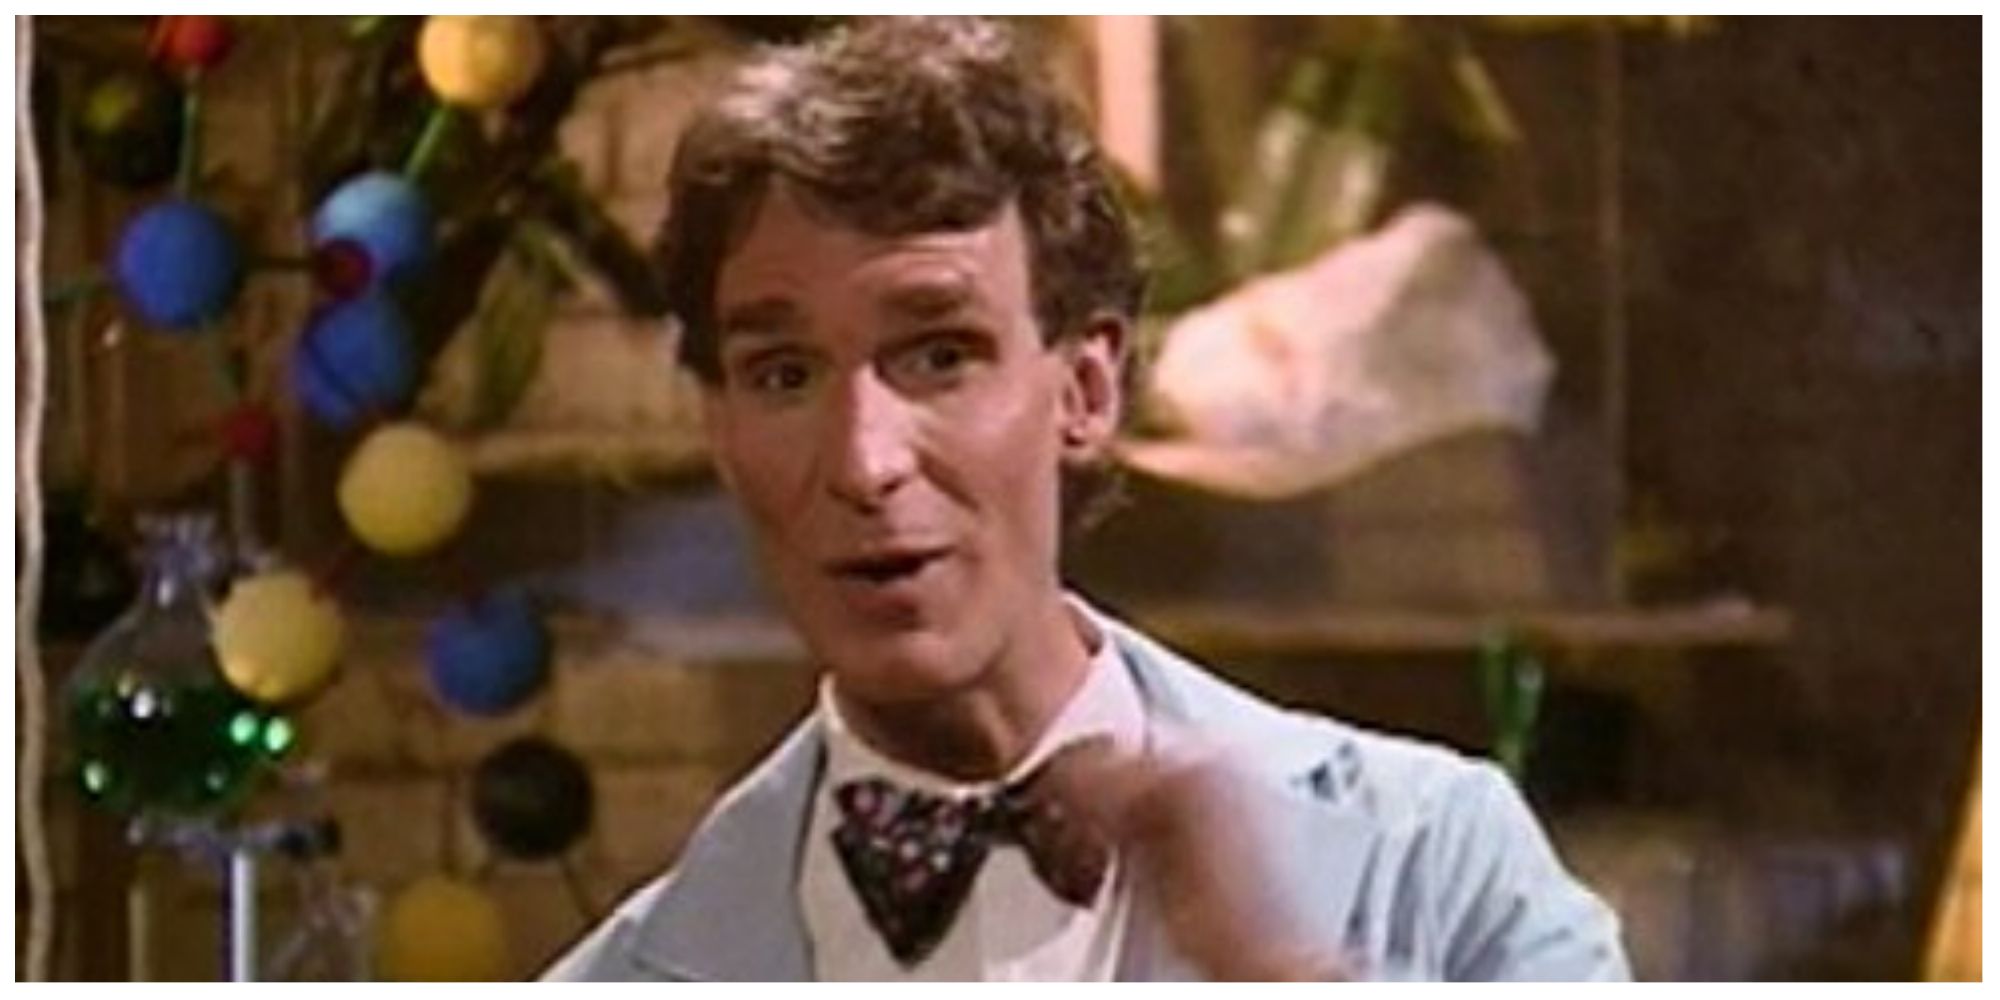 Bill Nye The Science Guy teaching science